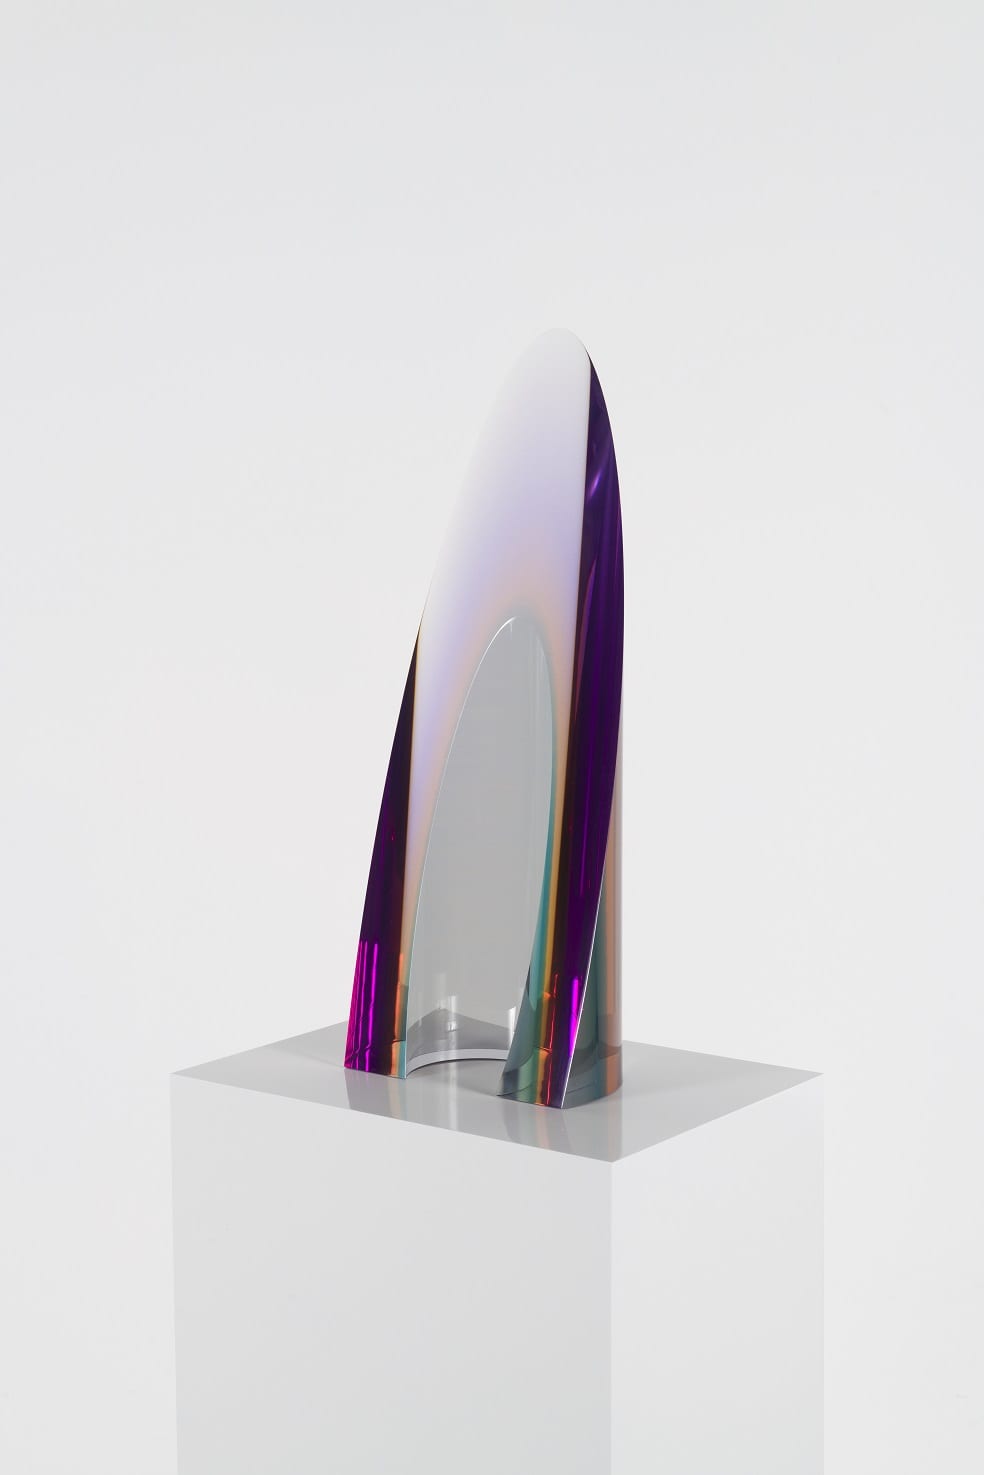 A Fred Eversley sculpture in a multicolored, parabolic shape.